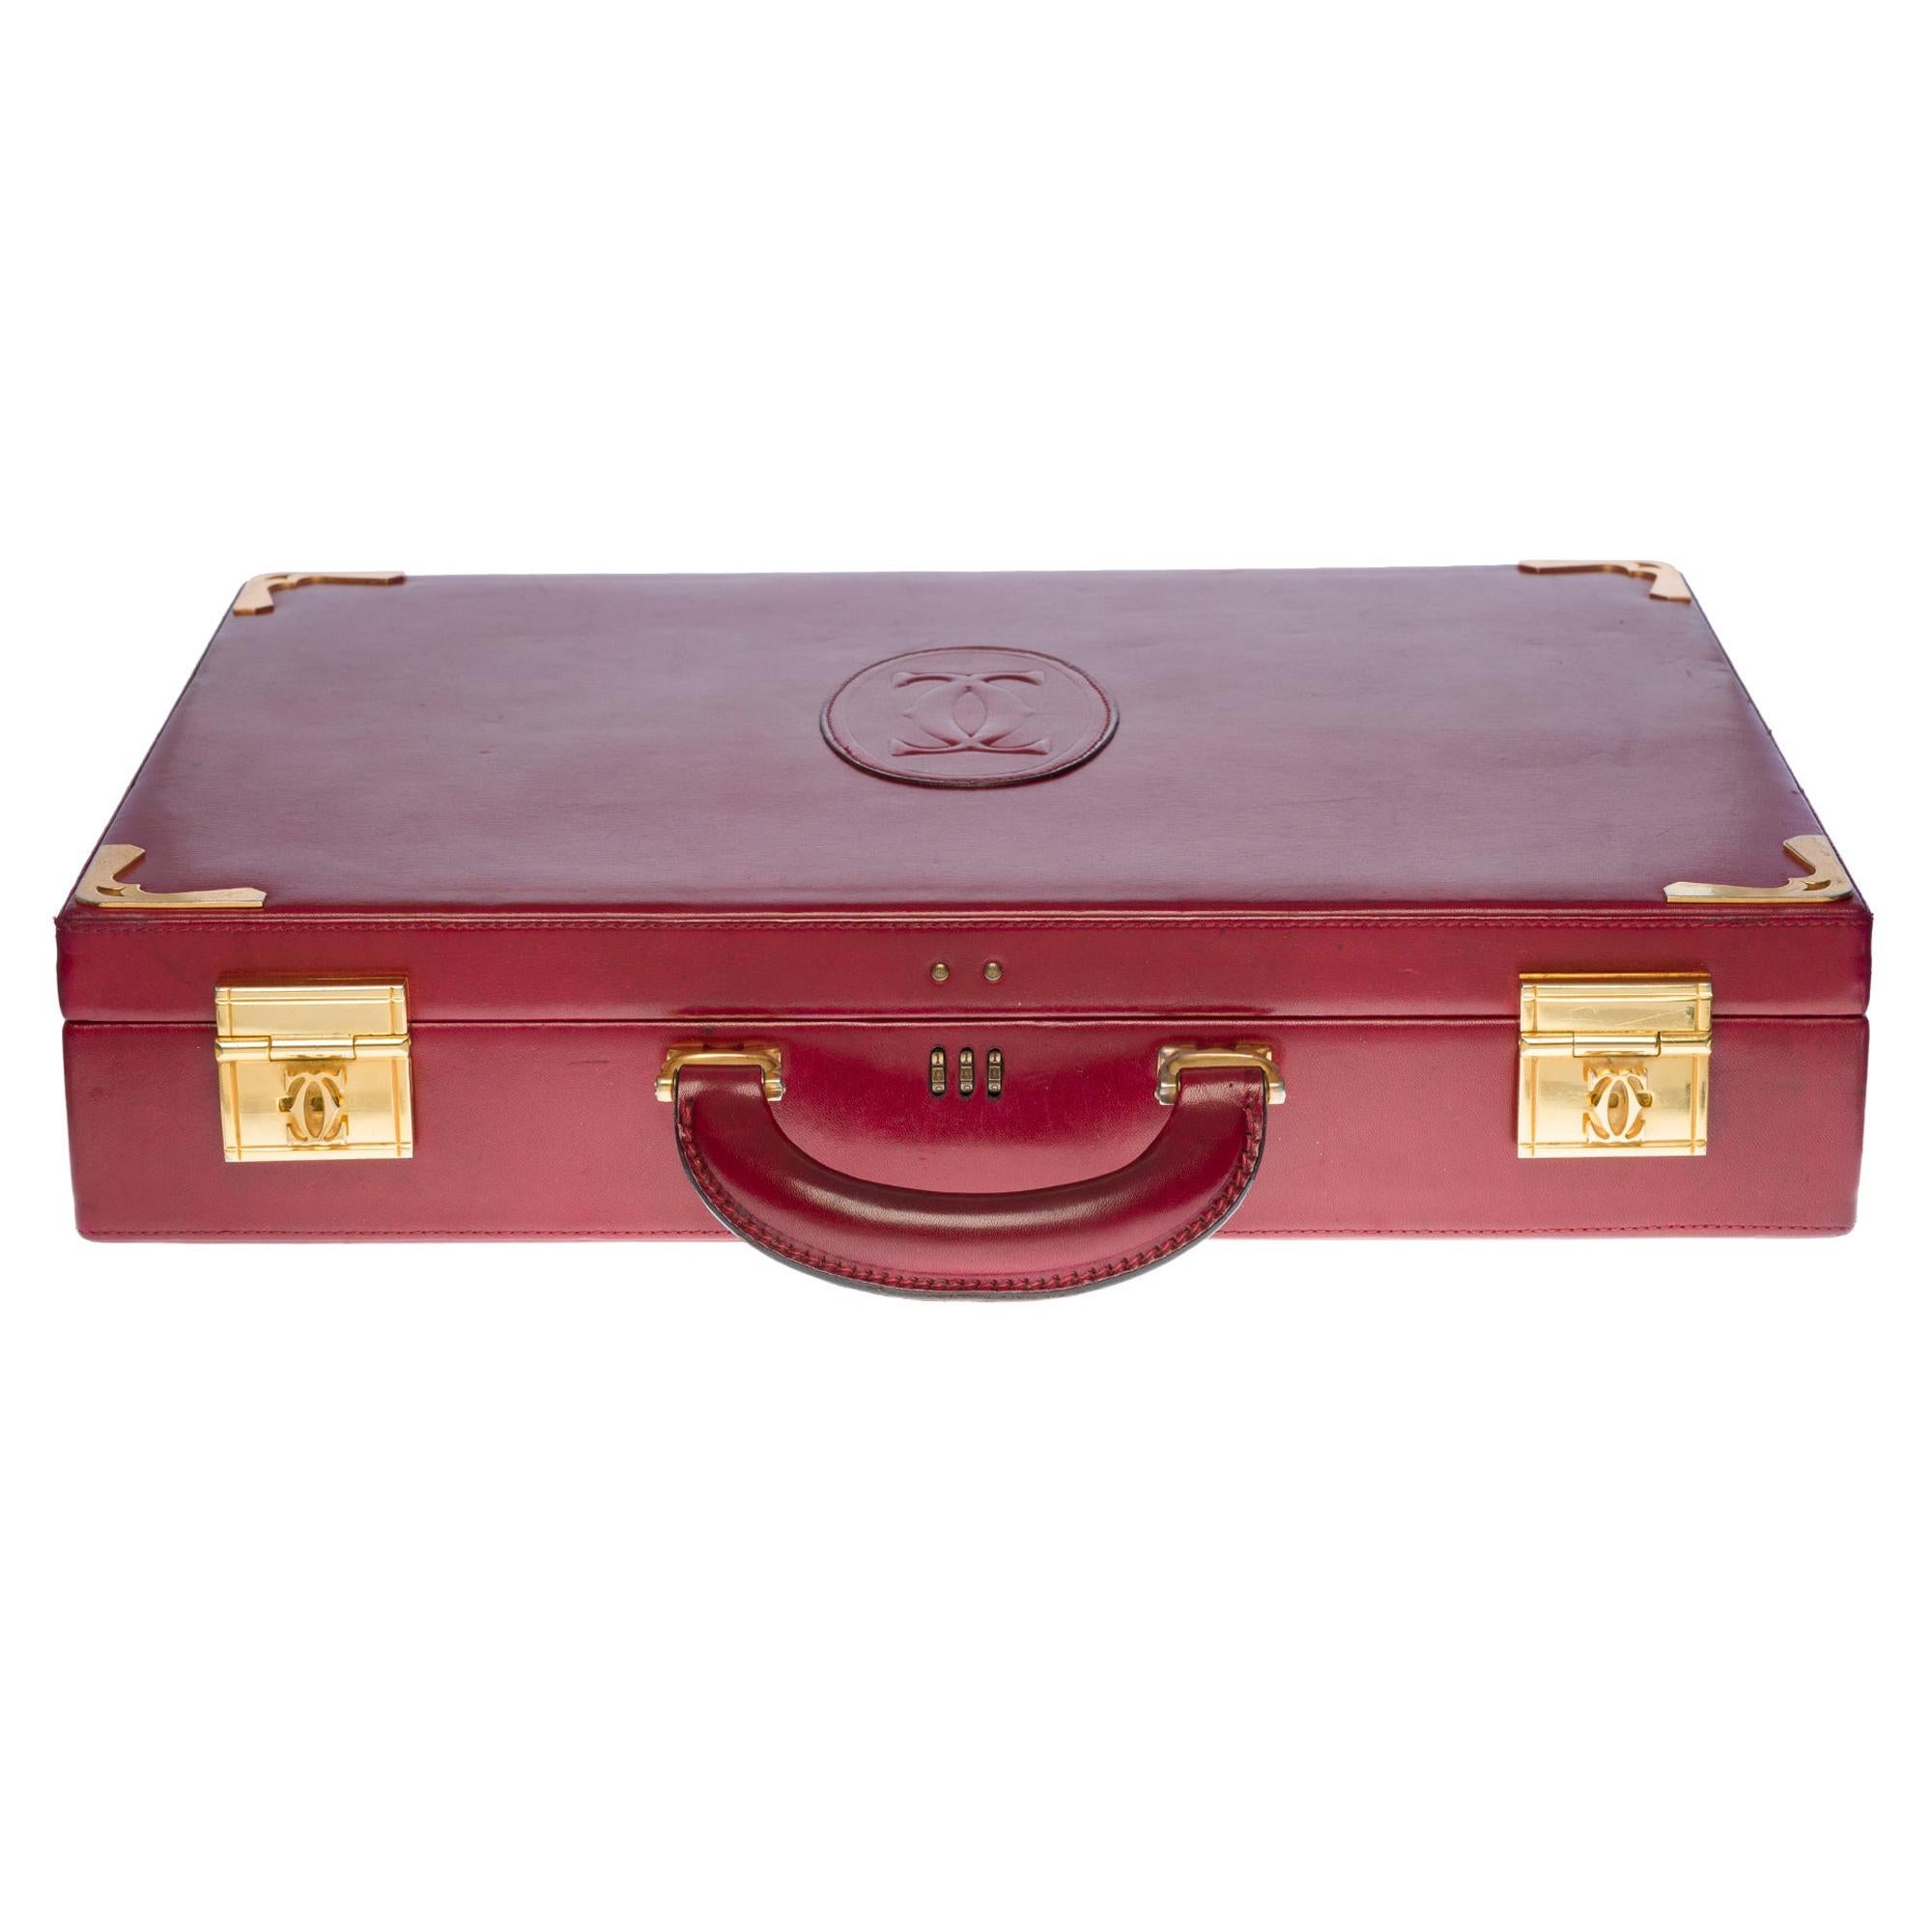 Rare Cartier Attaché Case in burgundy leather and gold hardware